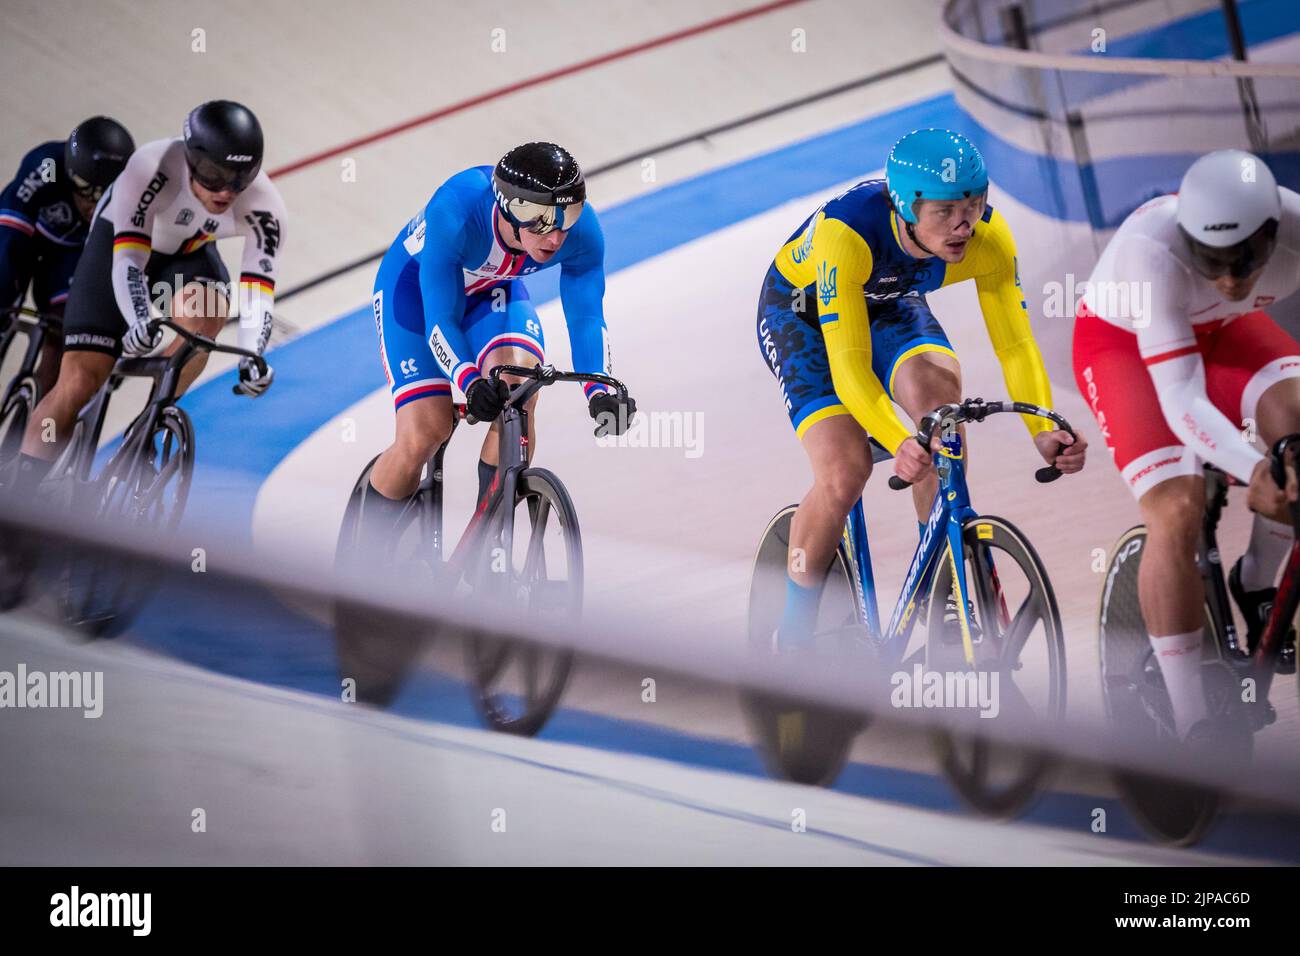 Tomas Babek of Czech Republic, center, competes at men's Keirin quarterfinal during the European Cycling Championships in Munich, Germany, August 16, Stock Photo